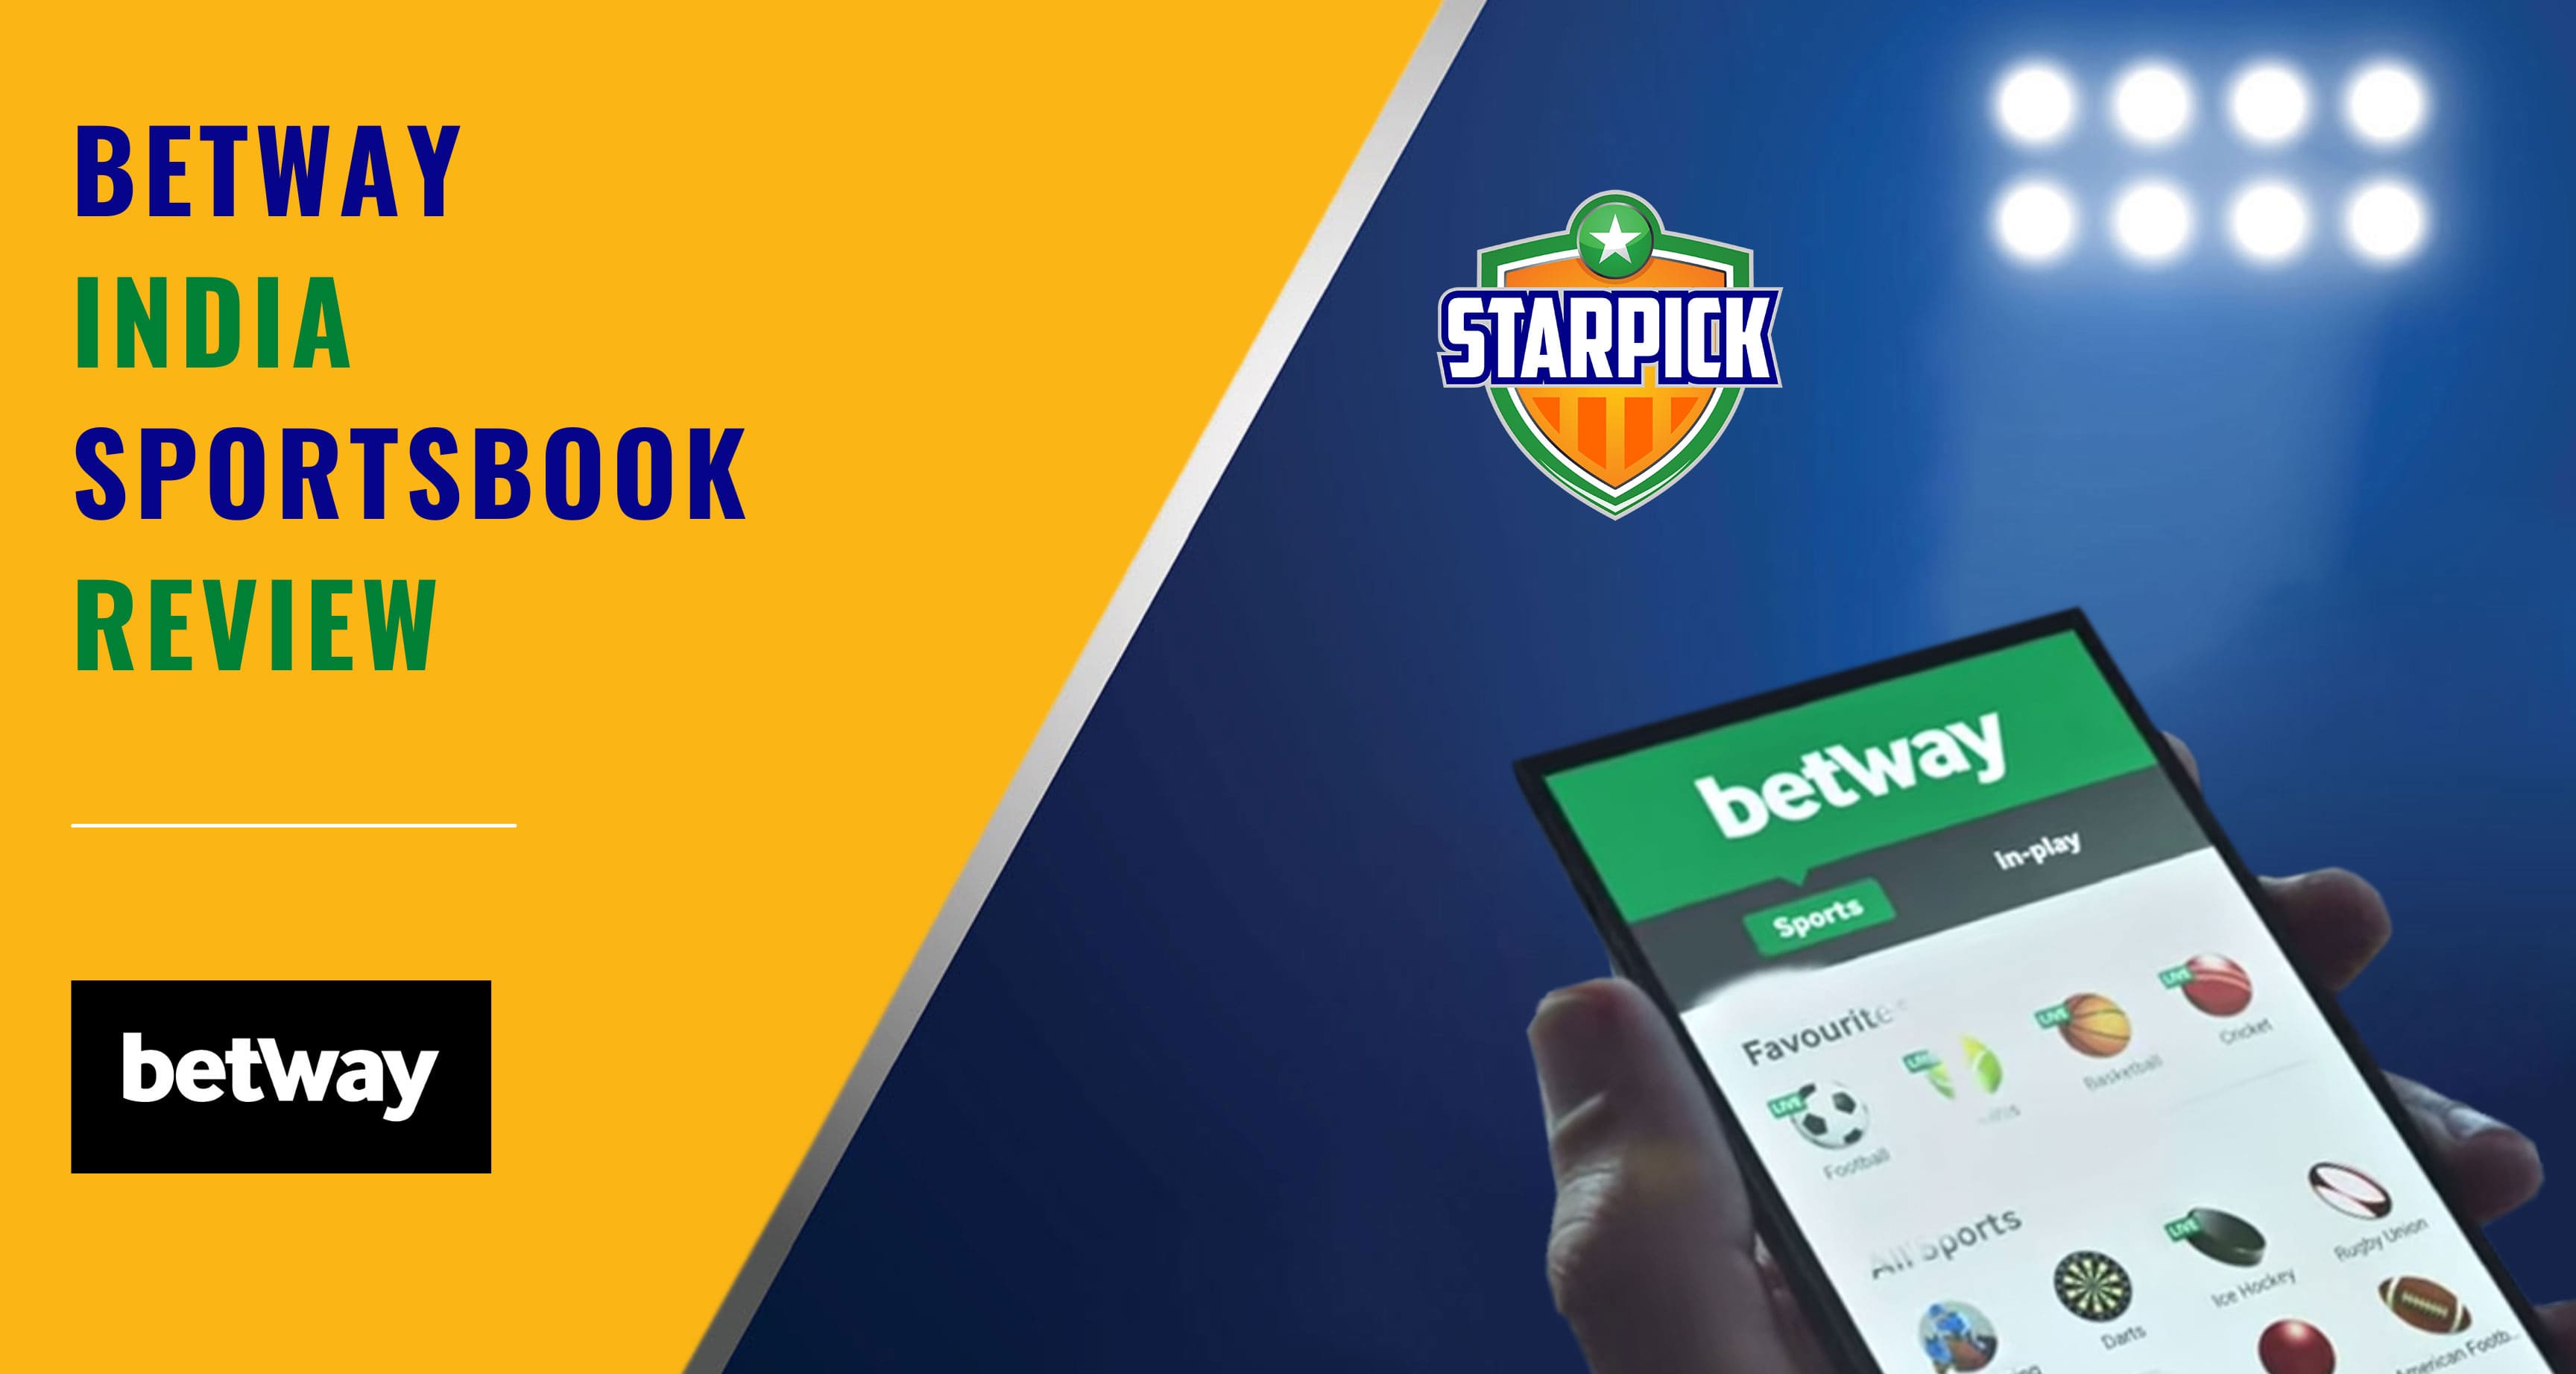 7 Facebook Pages To Follow About betway ghana app